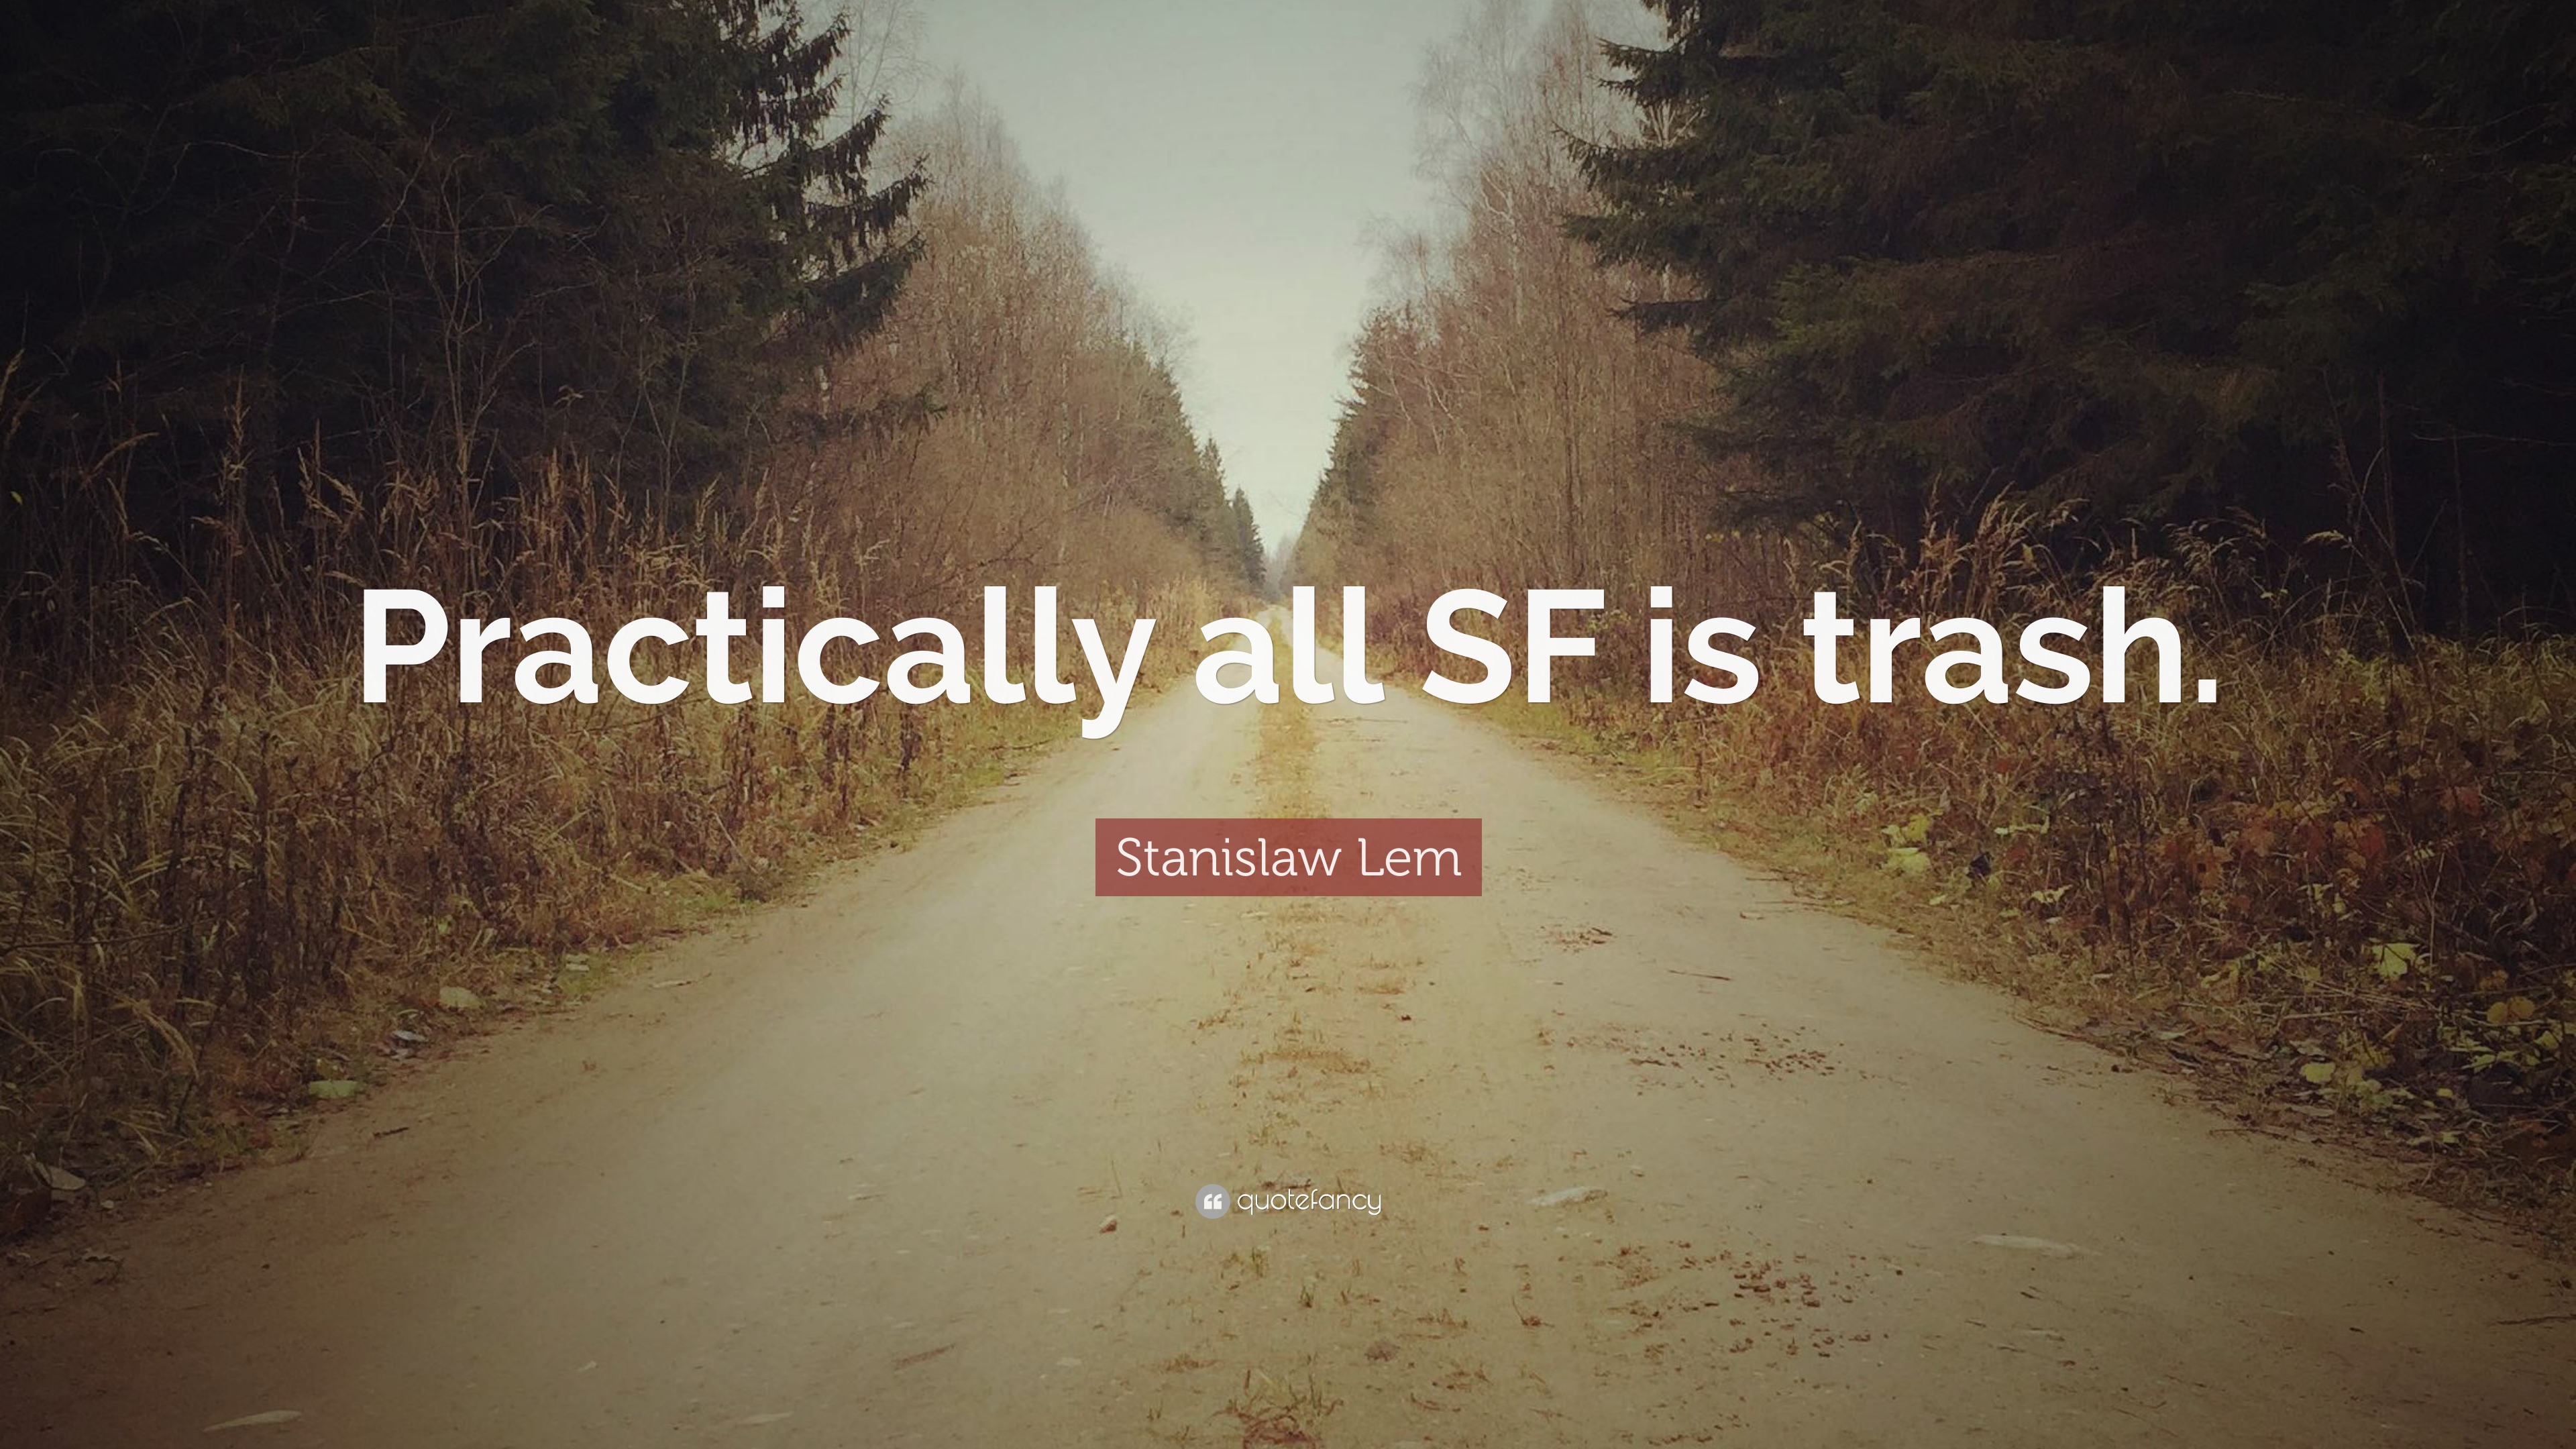 Stanislaw Lem Quote: “Practically all SF is trash.” 7 wallpaper